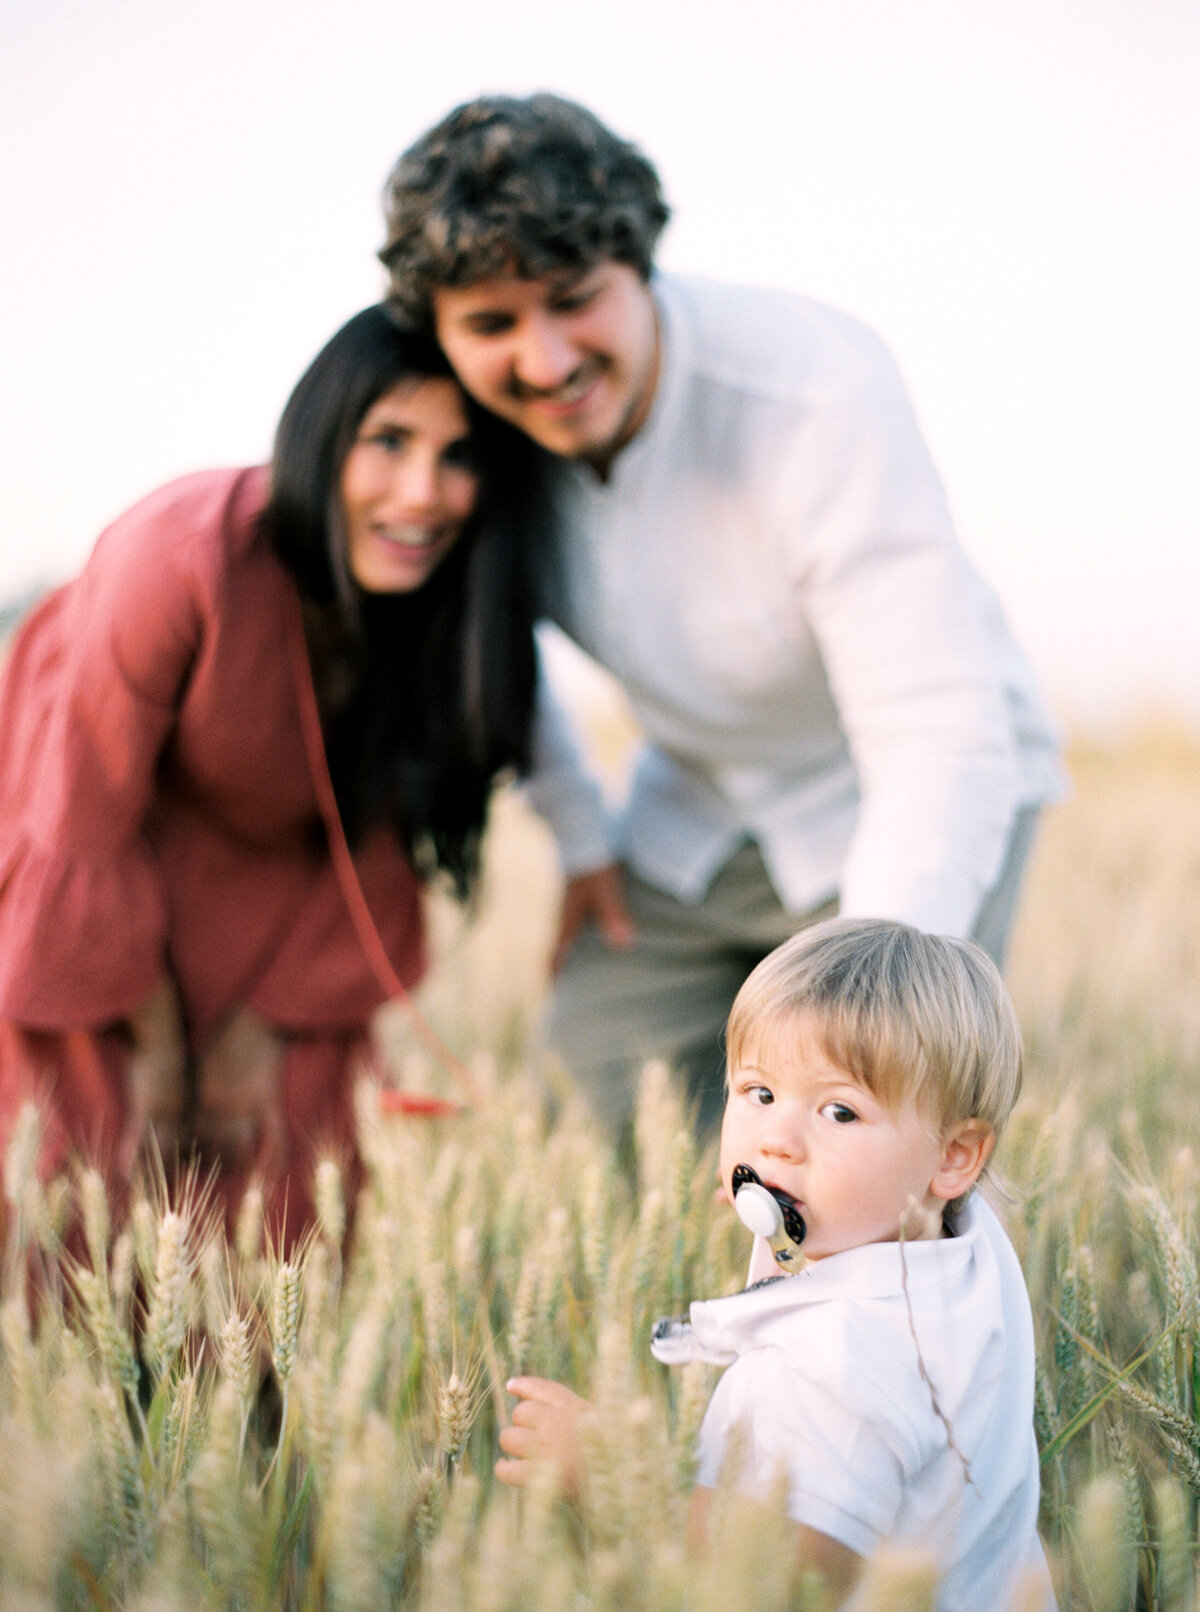 Father and mother look adoringly at toddler son in a field